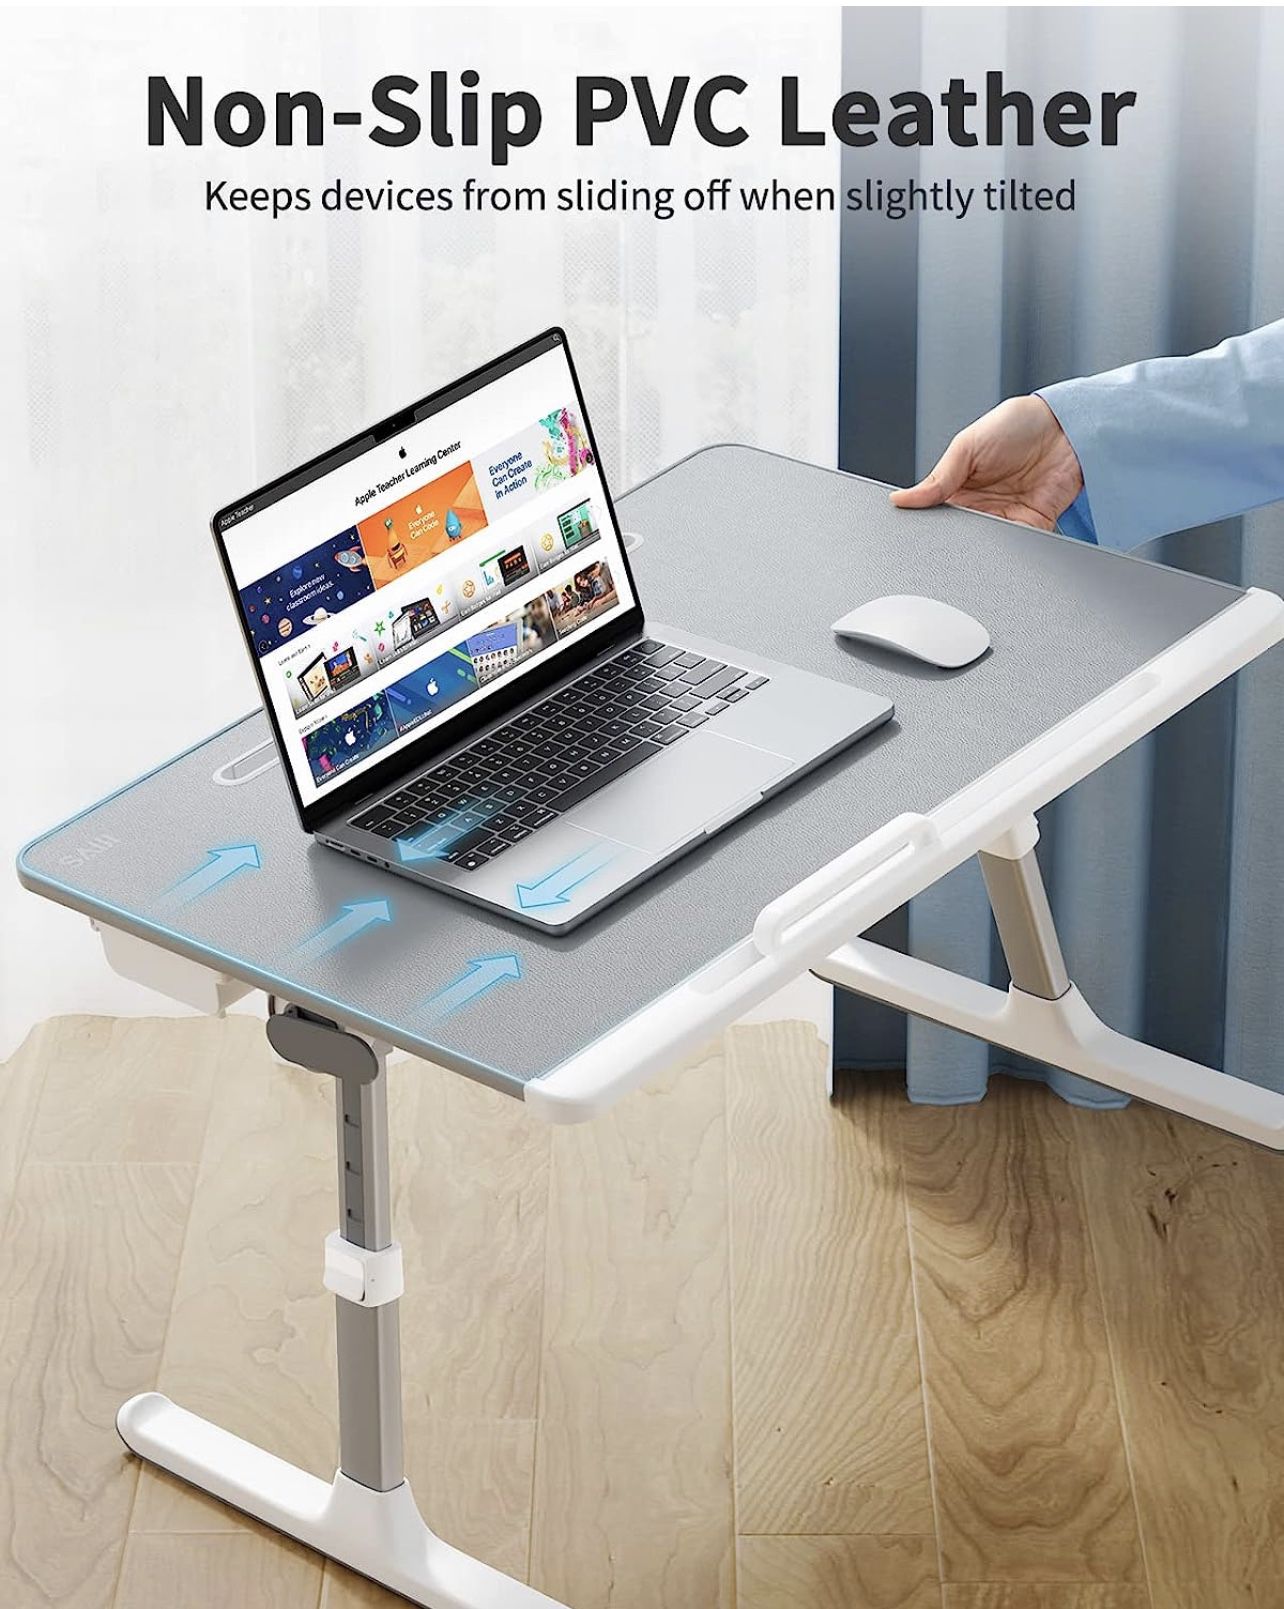 Laptop Bed Tray Desk, SAIJI Adjustable Stand for Bed, Foldable Table with Storage Drawer Eating